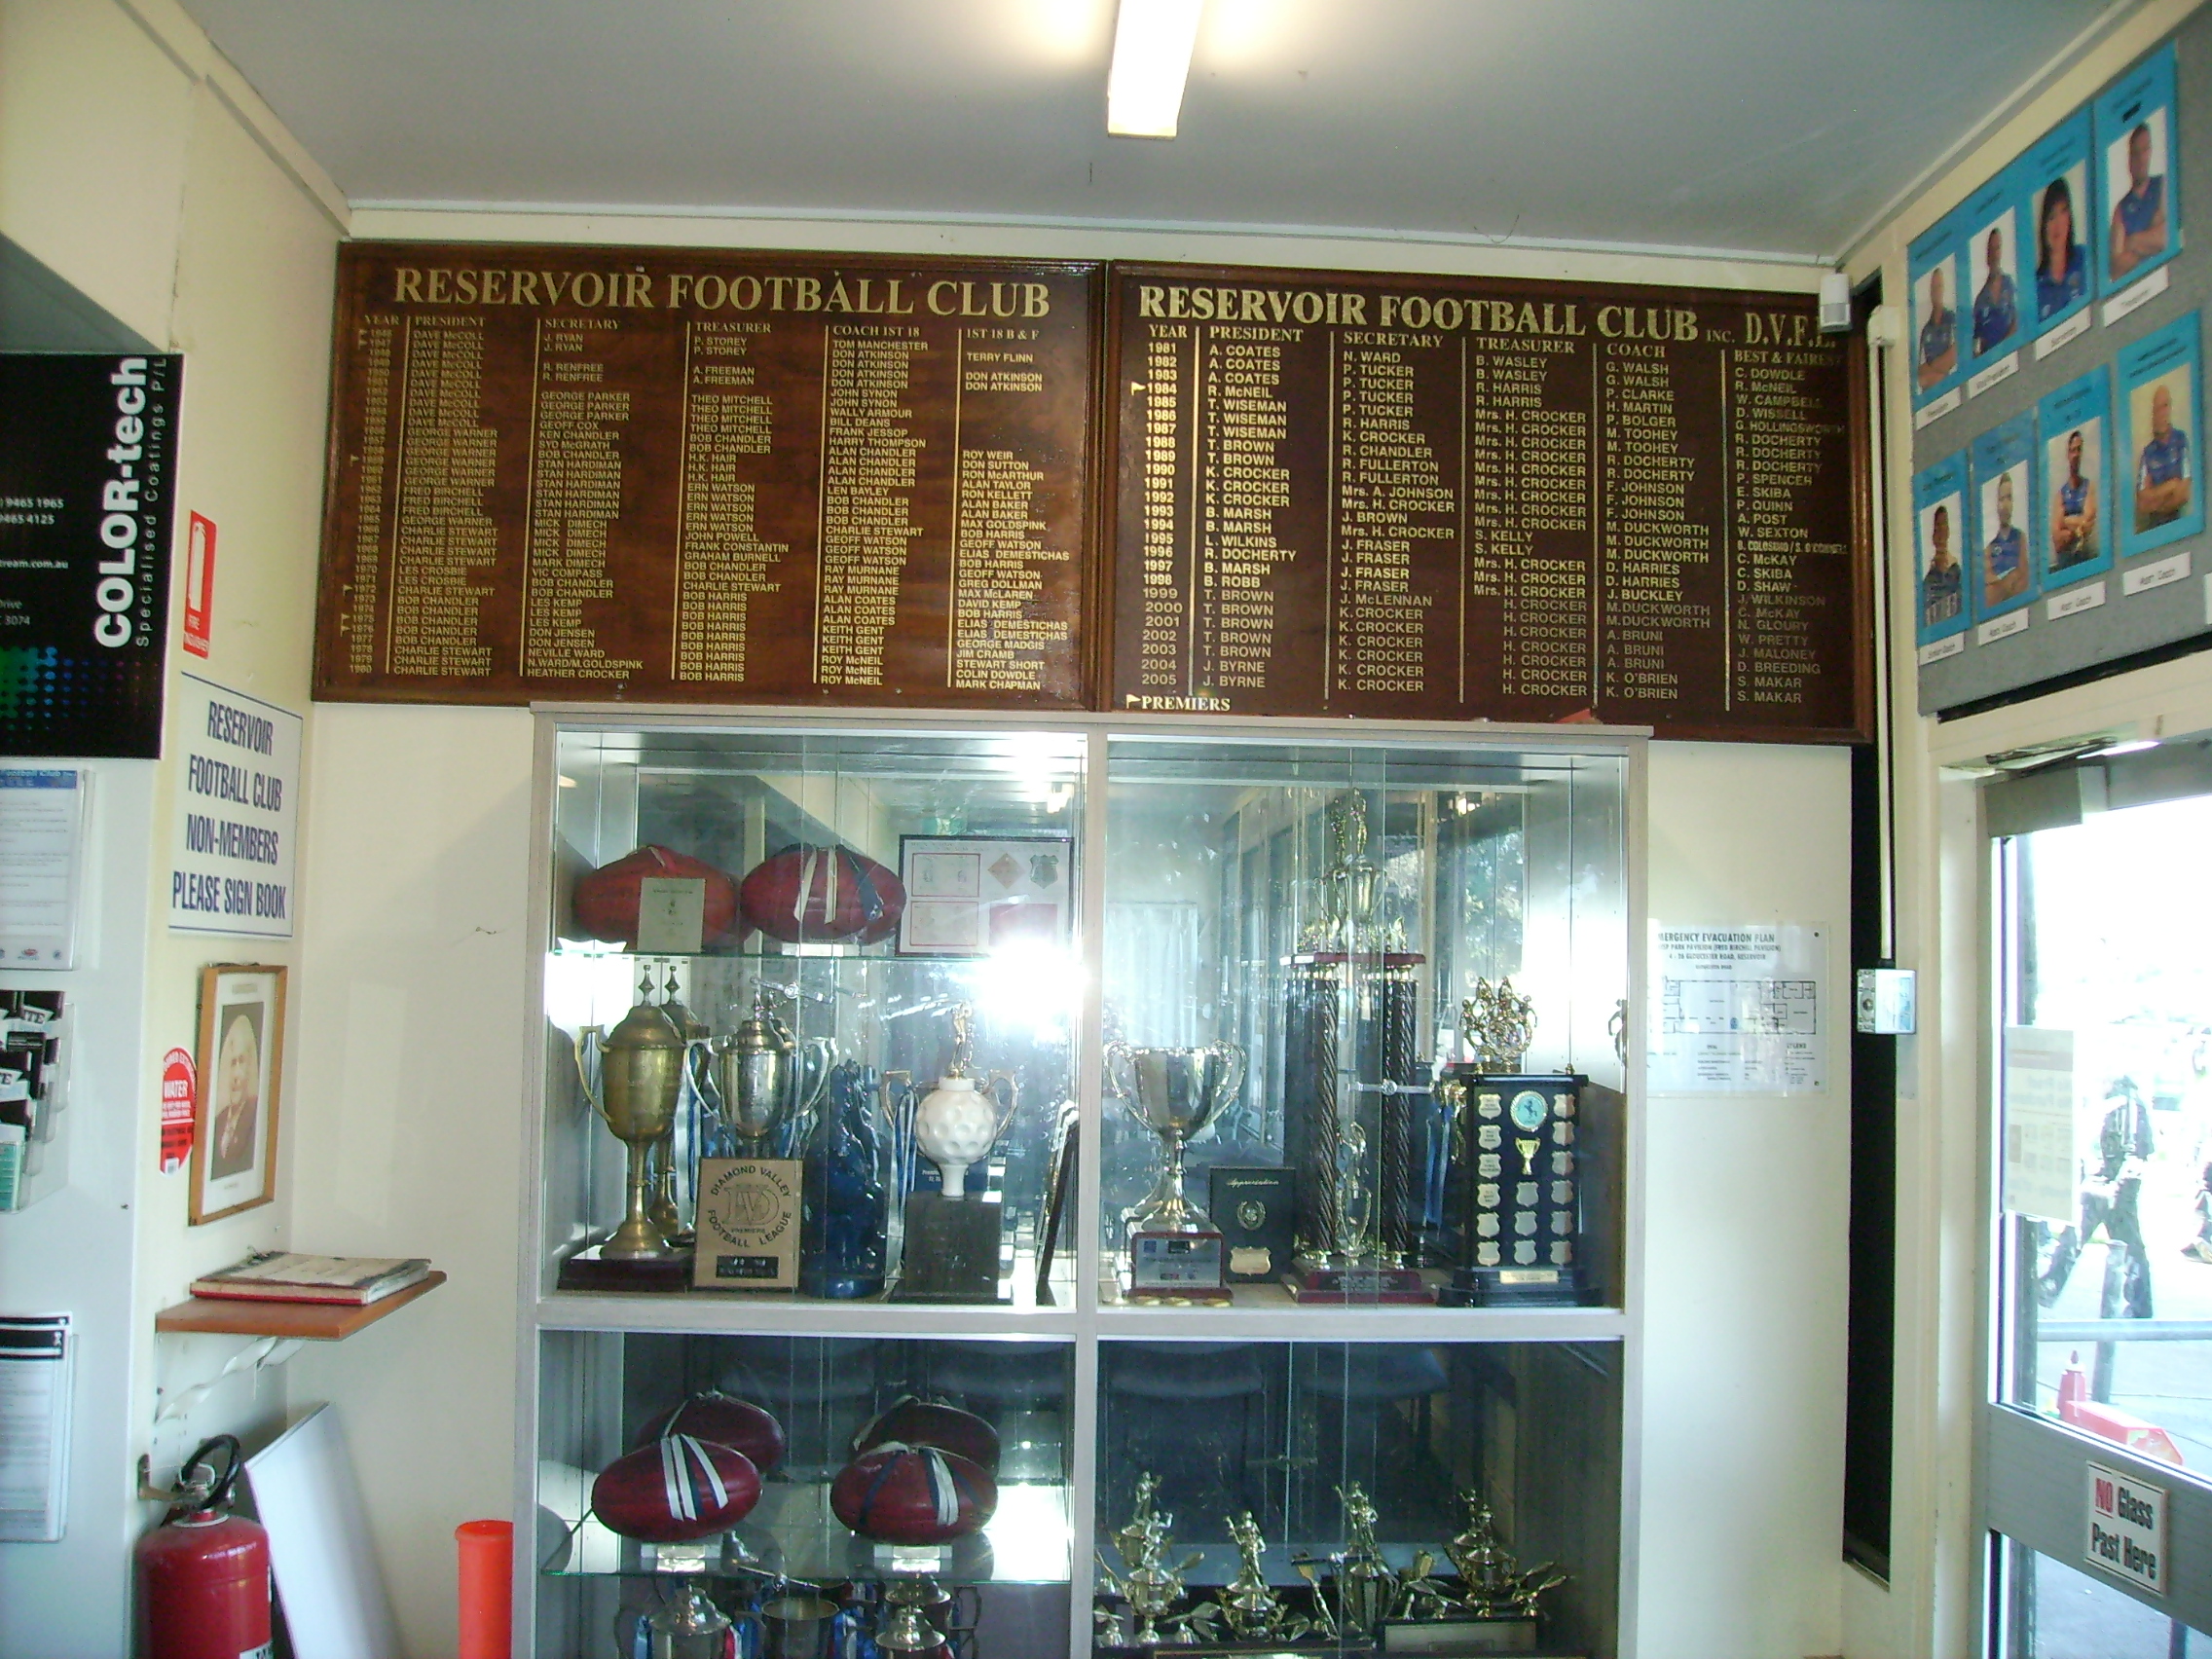 Image of Reservoir Football Club Honour boards and trophy cabinet